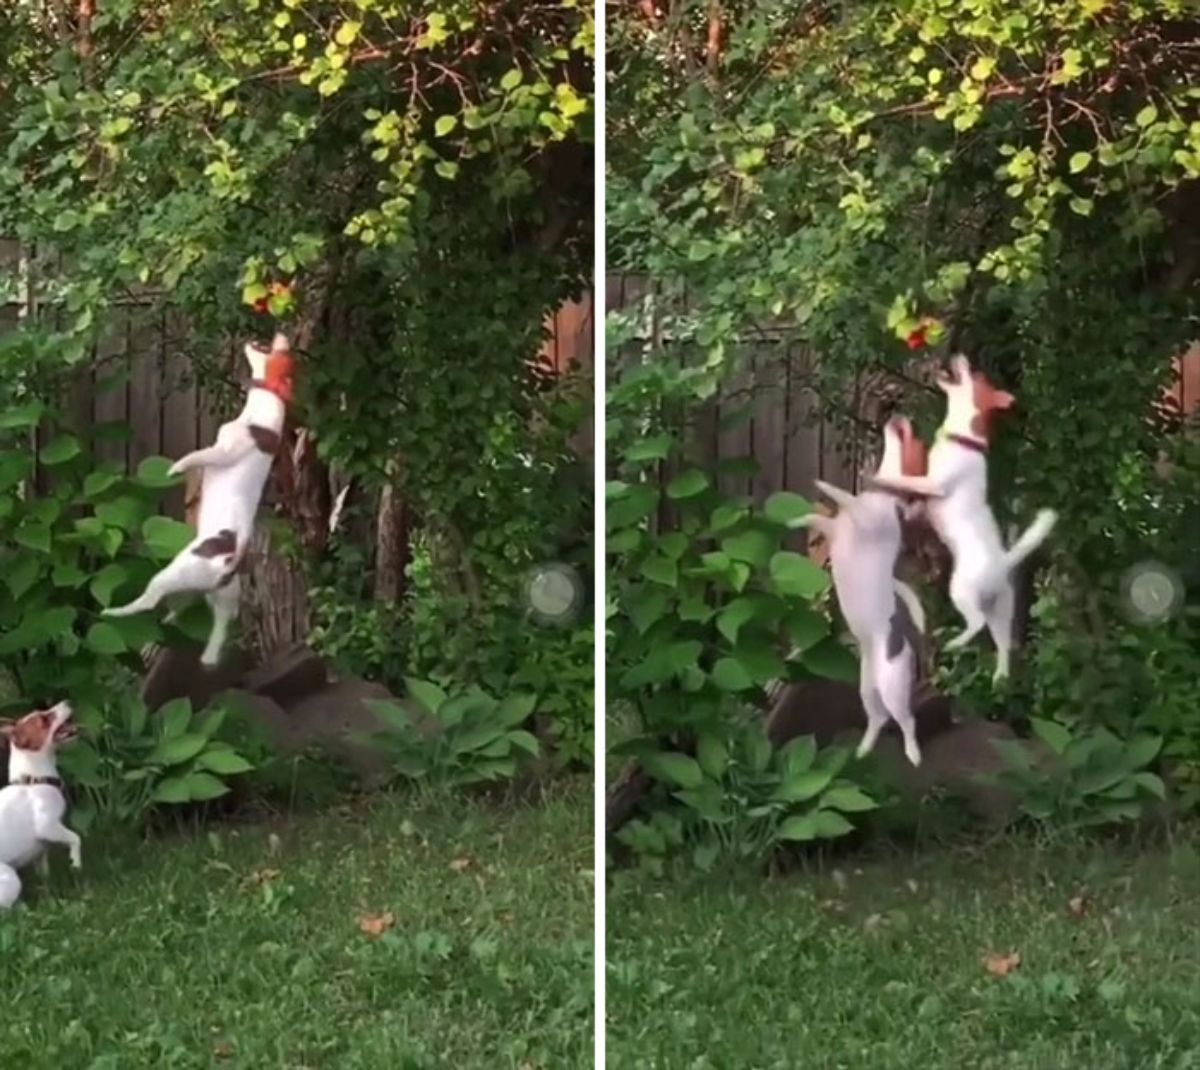 2 photos of 2 brown and white dogs jumping up trying to reach fruit on a tree